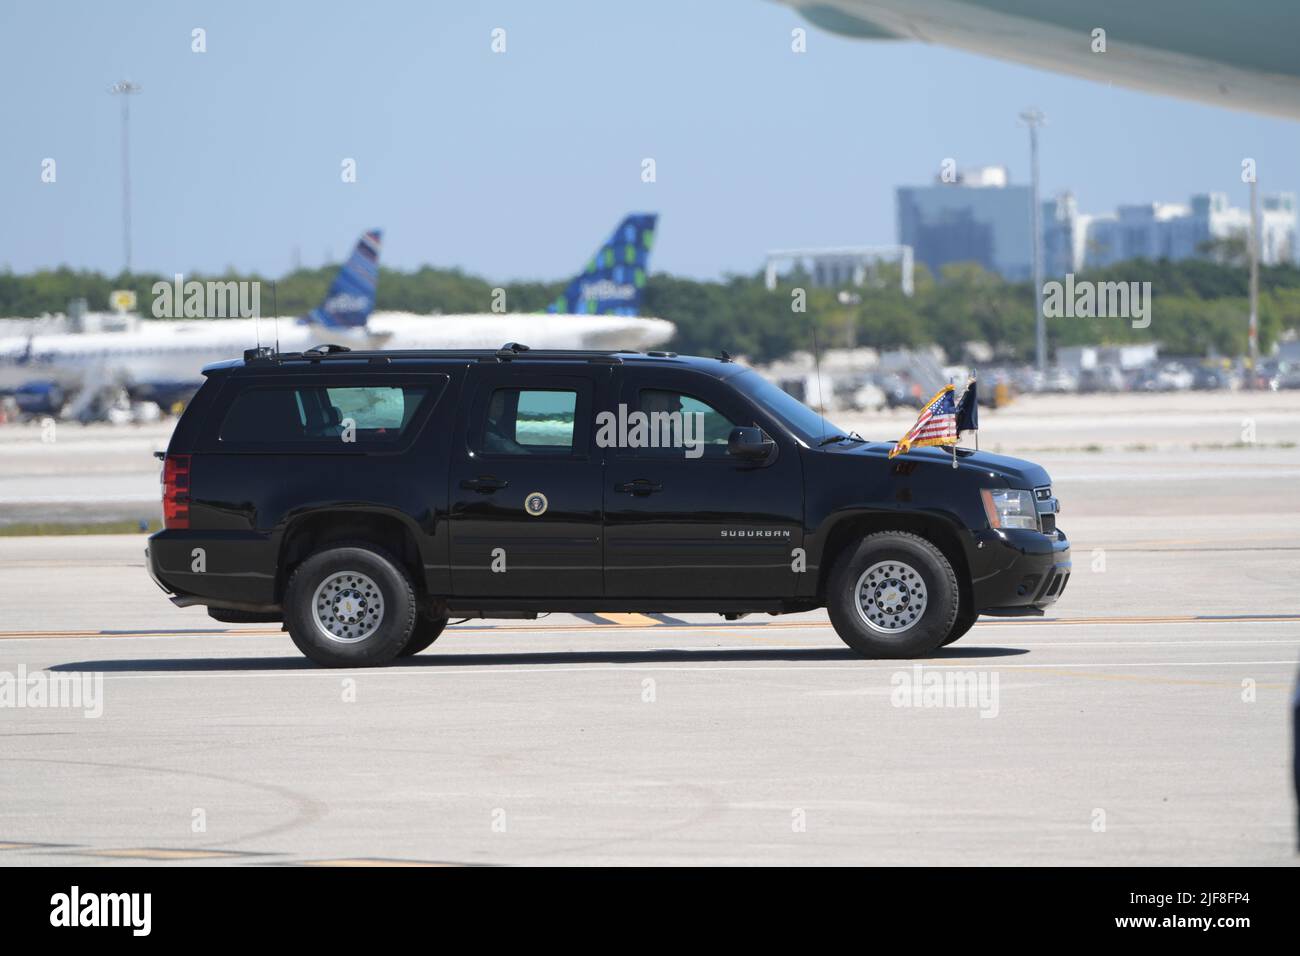 MIAMI, FL - JULY 10: US President Donald Trump arriving at Miami International Airport on July 10, 2020 in Miami, Florida. The President was greeted by Carlos A. Gimnez Mayor of Miami-Dade County and is in town to receive a briefing on SOUTHCOM Enhanced Counternarcotics Operation and to attend Iglesia Doral Jesus Worship Center to participate in a roundtable on Supporting the People of Venezuela People: President Donald Trump Credit: Storms Media Group/Alamy Live News Stock Photo